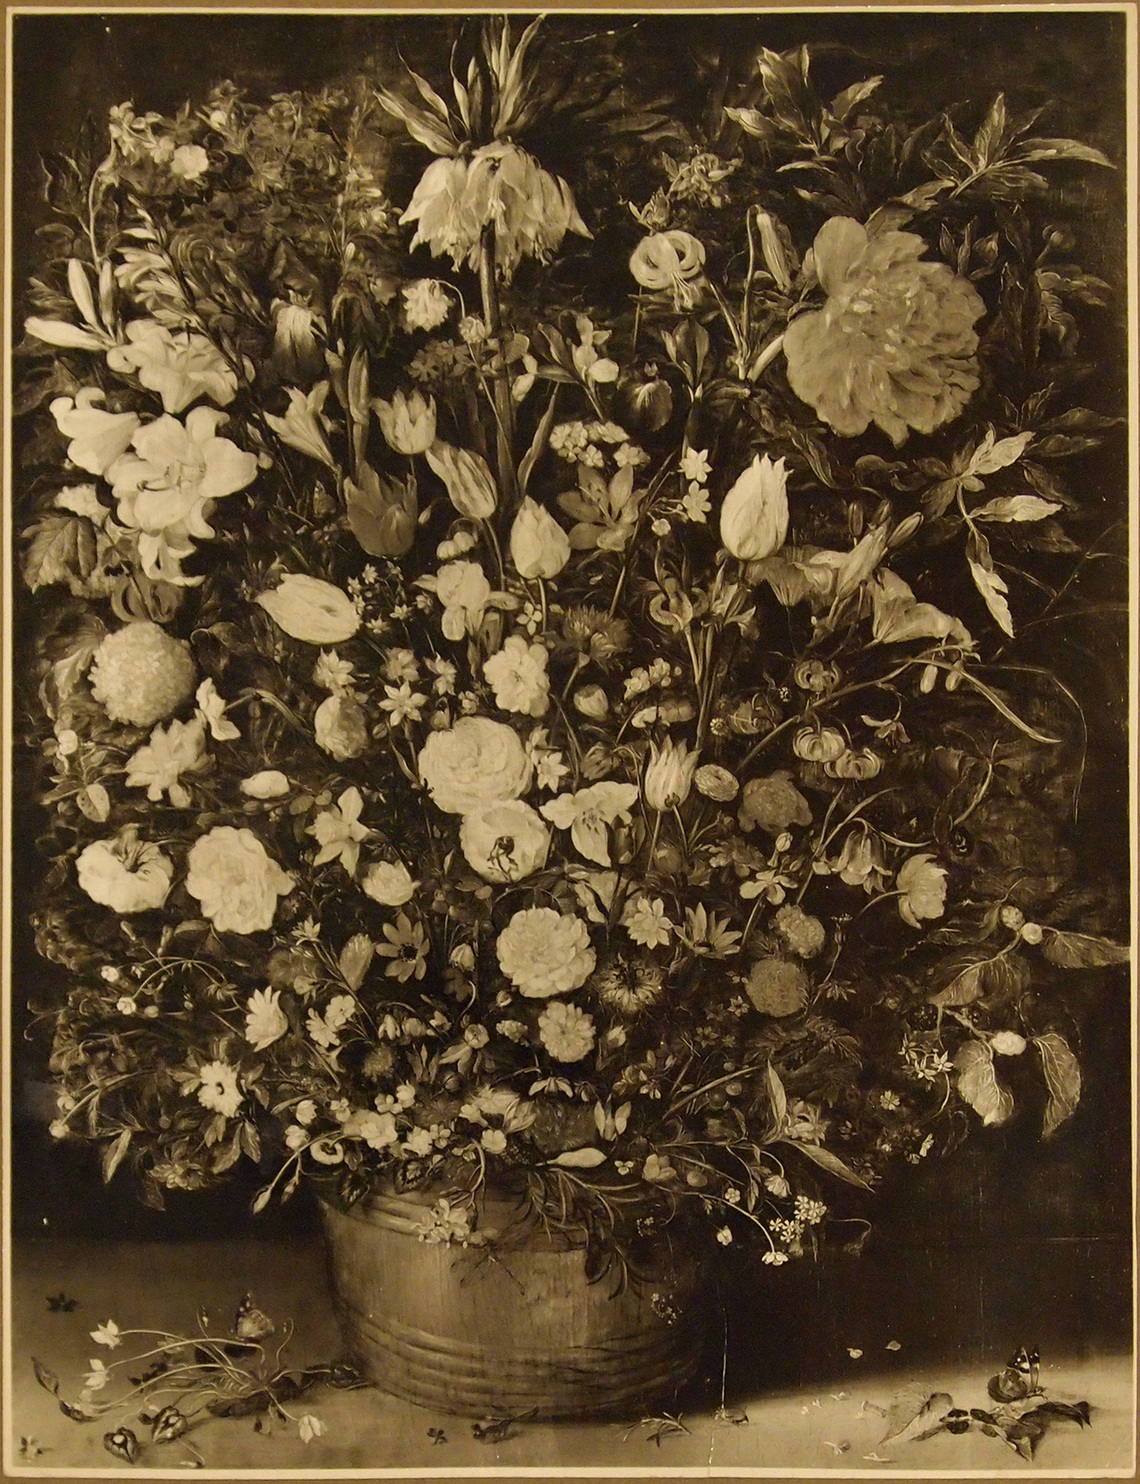 Flowers in a Wooden Tub (The Hague)